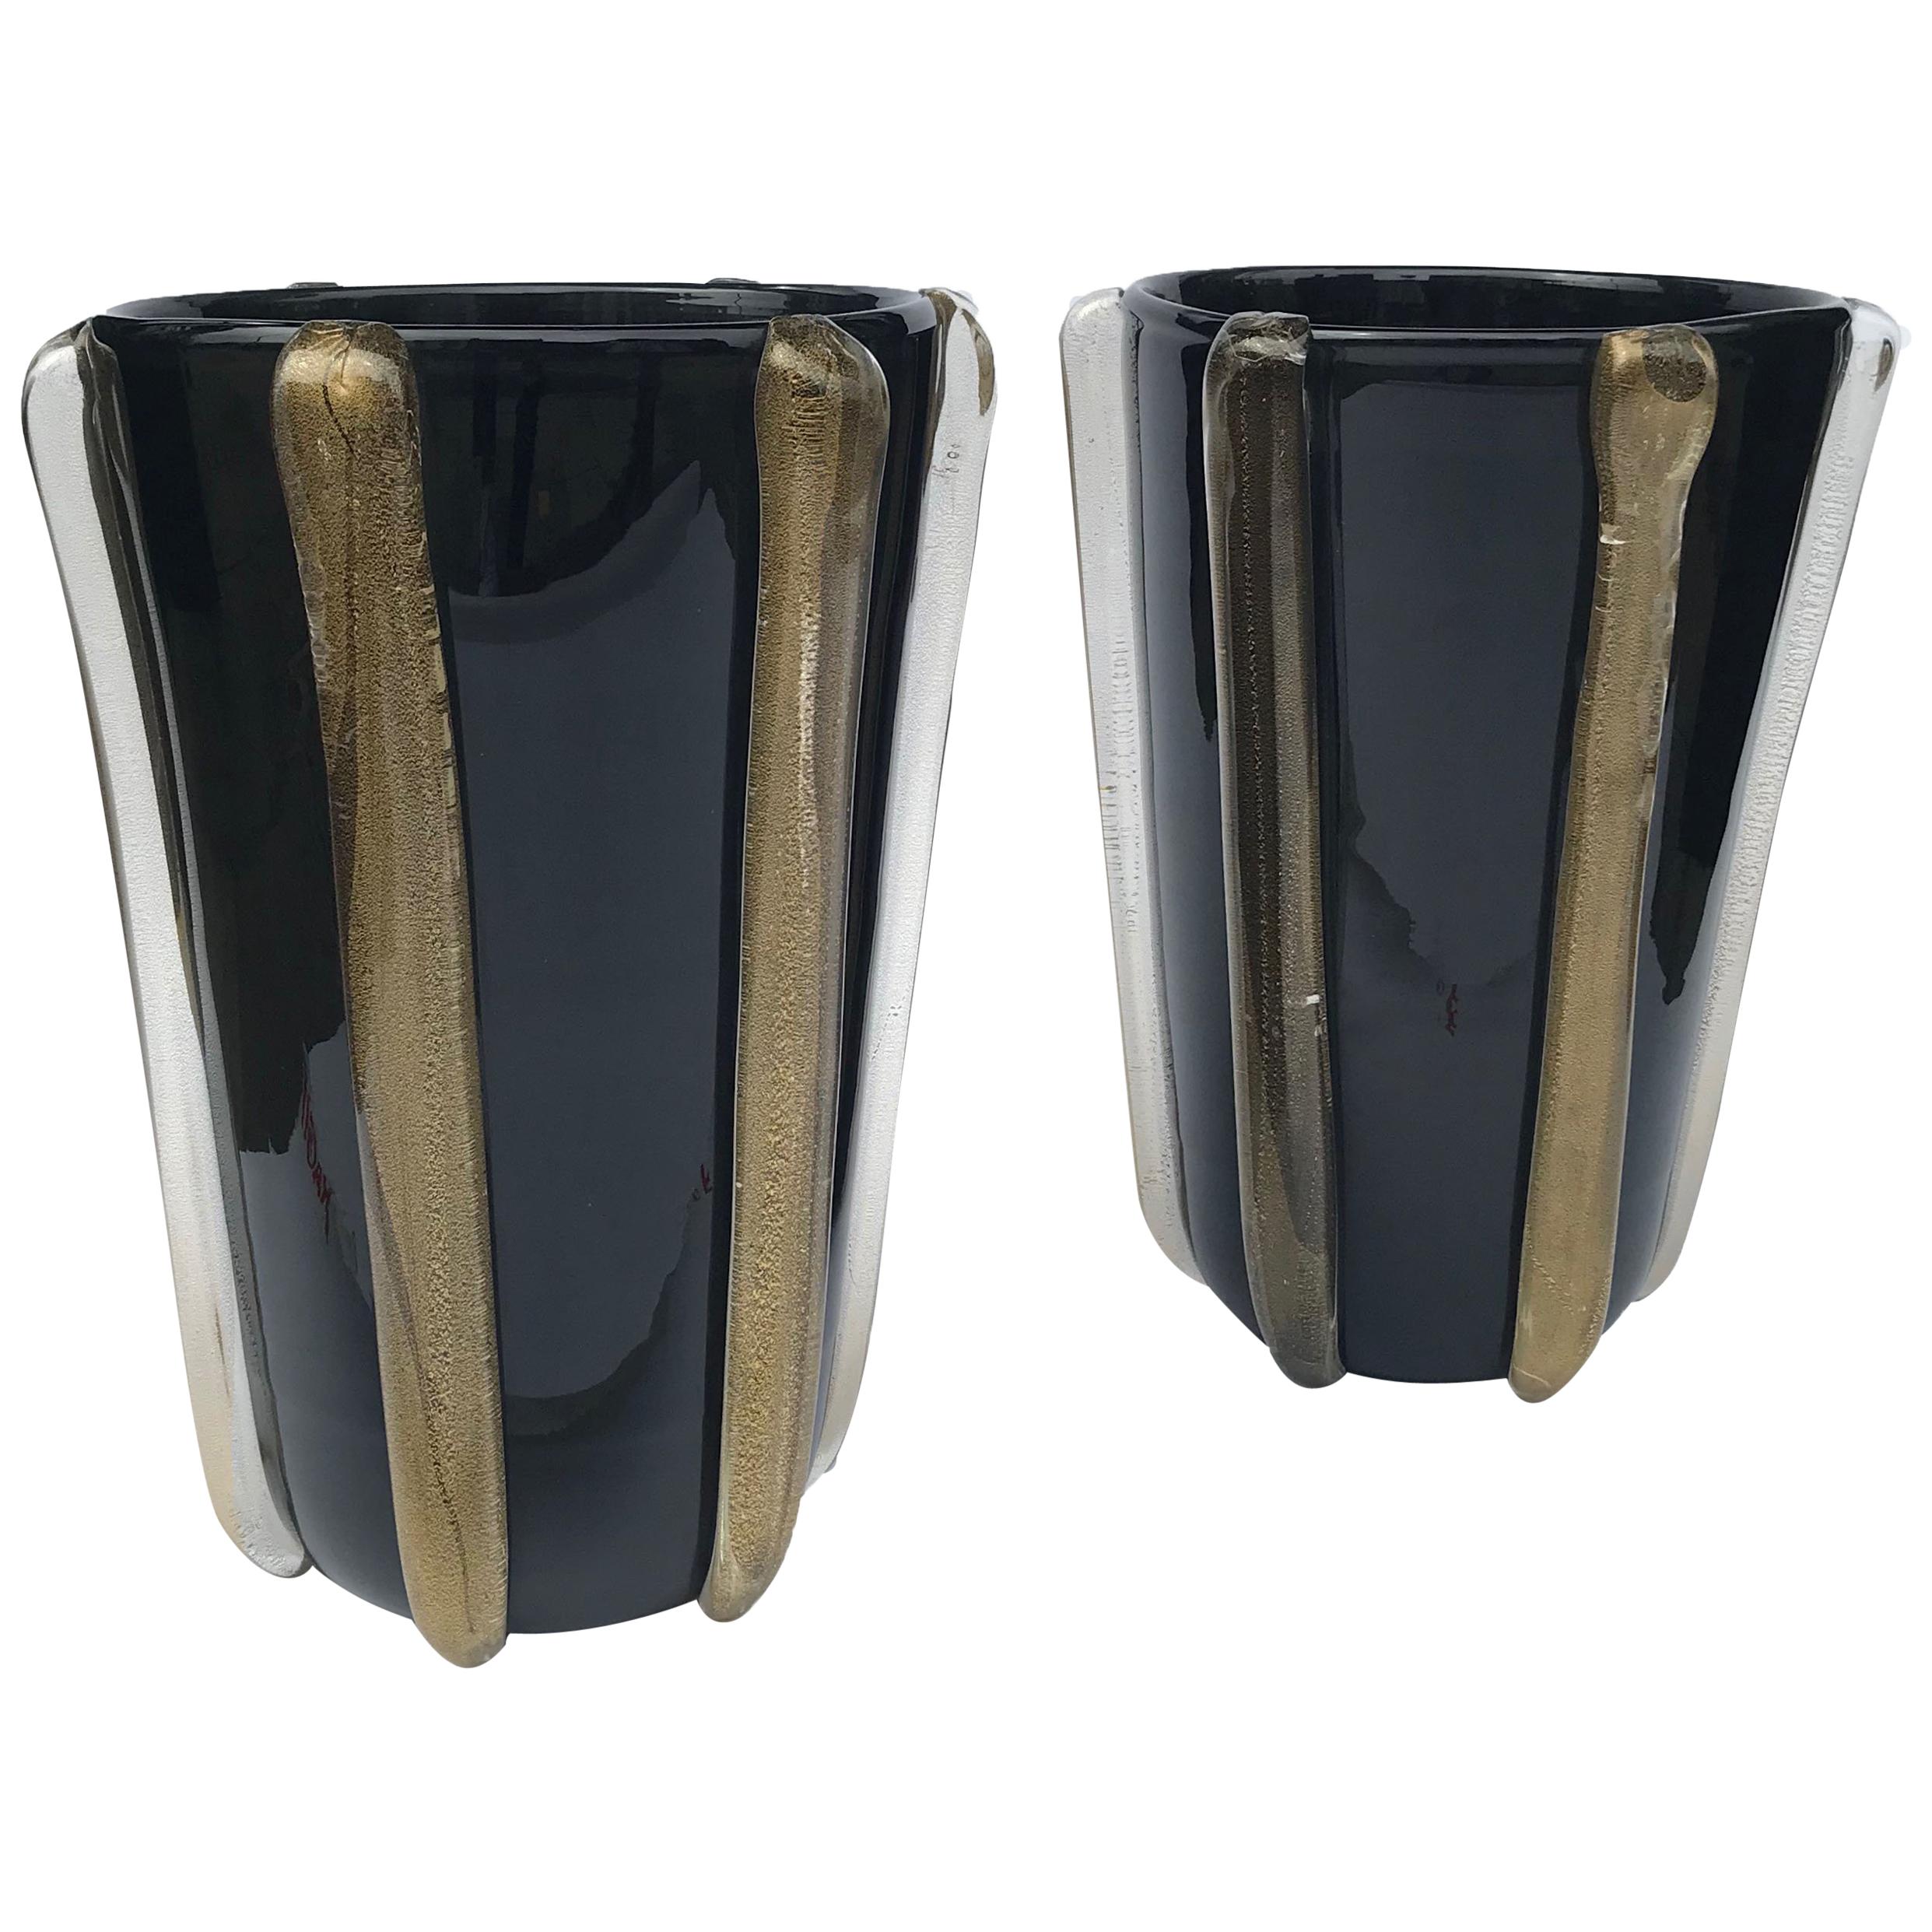 Pair of Black Murano Glass Vases with Gold Detailing